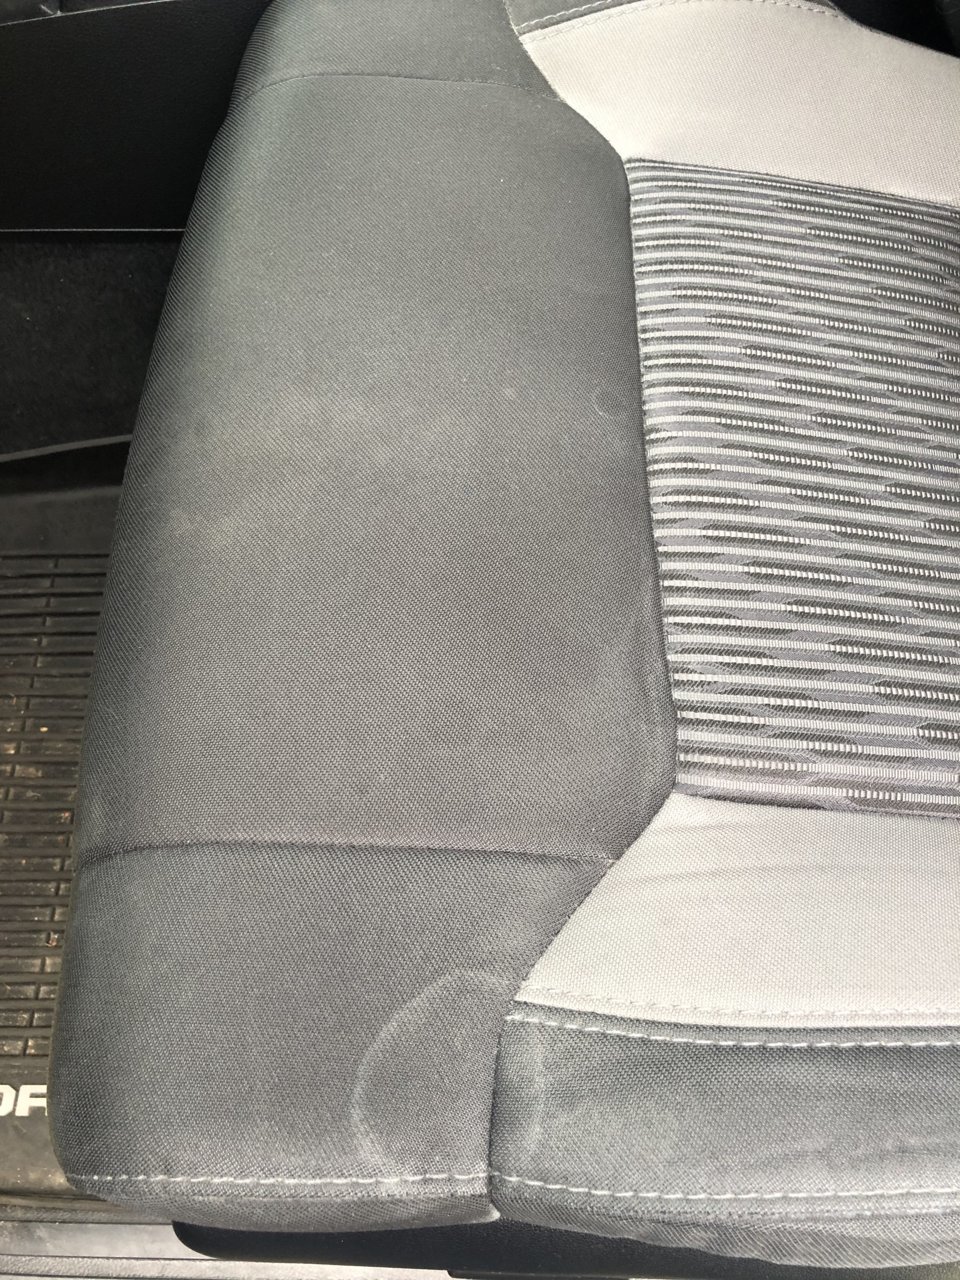 Upholstery Cleaner  Toyota Tundra Forum